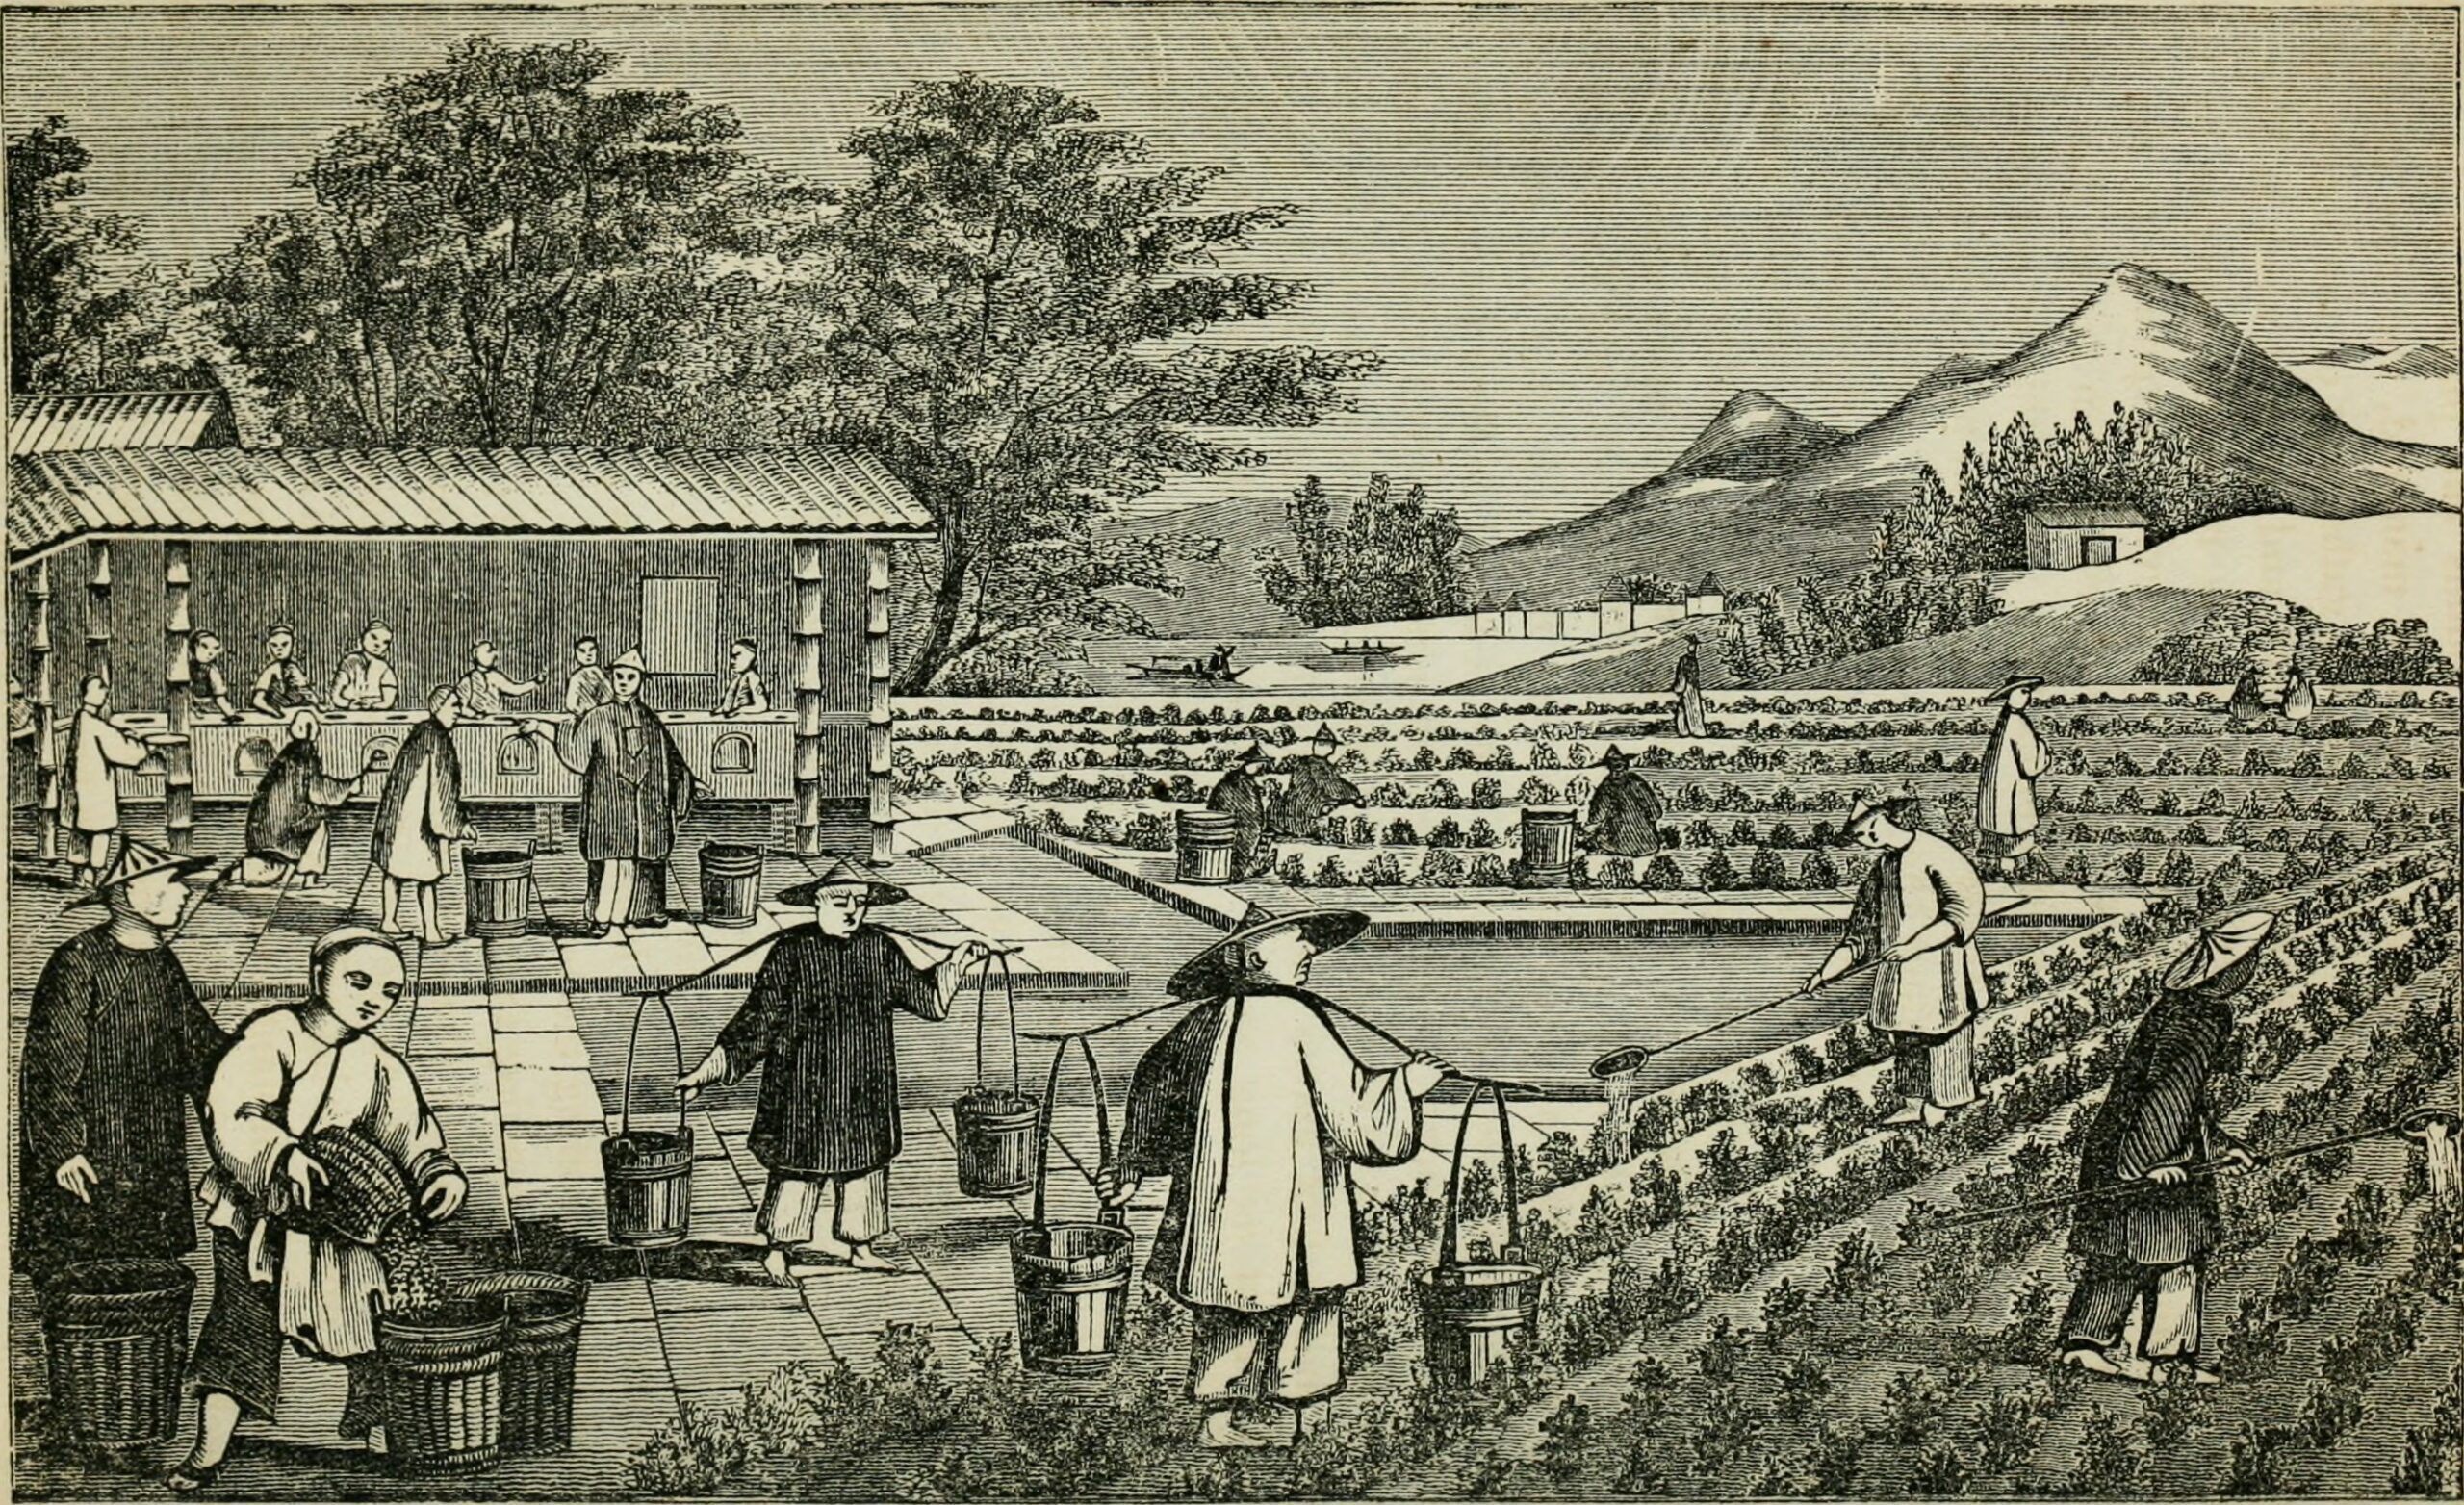 An illustration from a book published in 1851 depicts the cultivation of tea in China